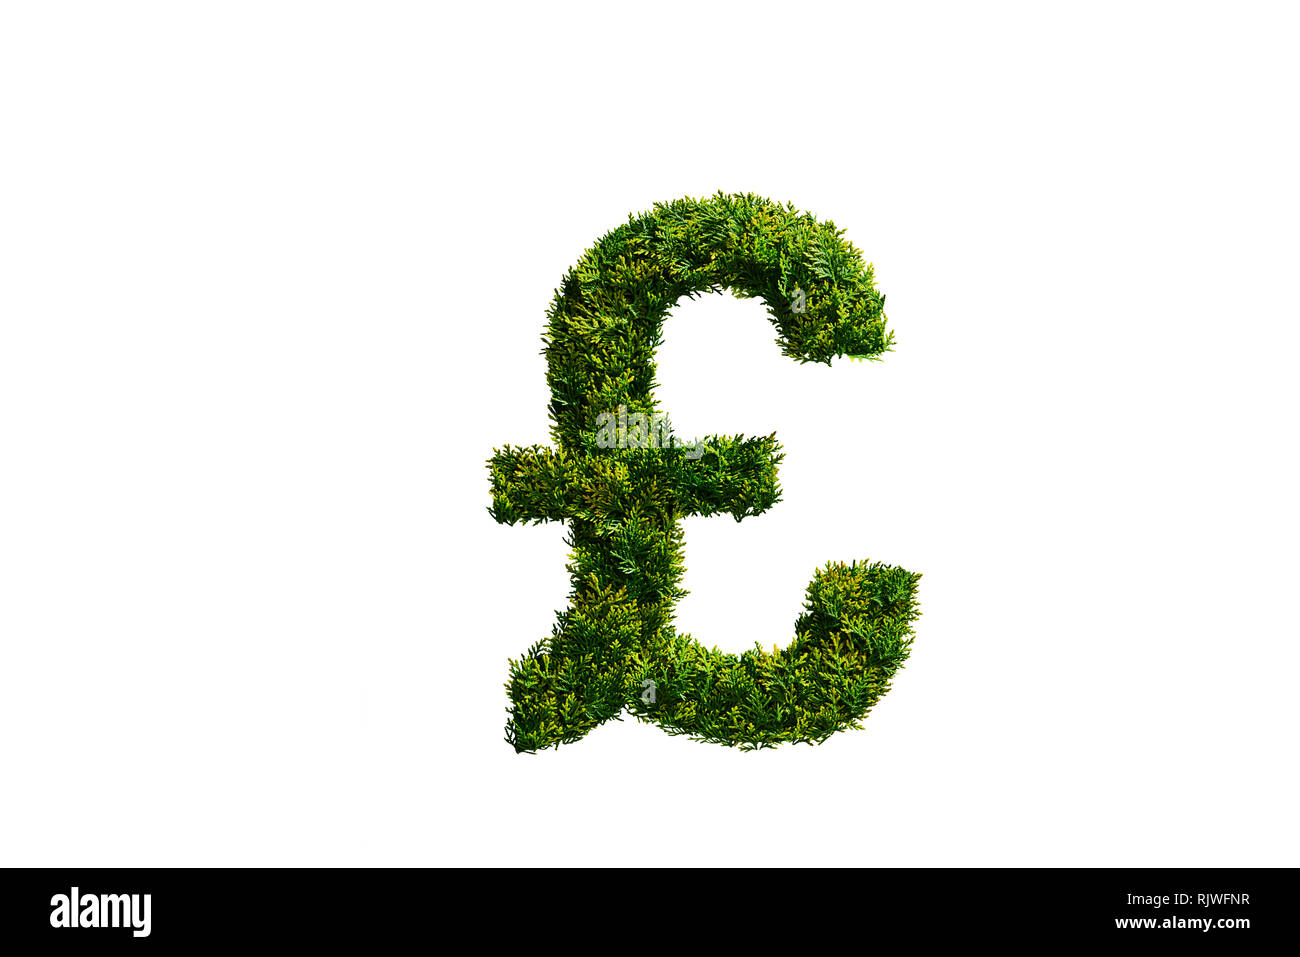 Topiary Tree in the Shape of the British Pound Symbol Stock Photo